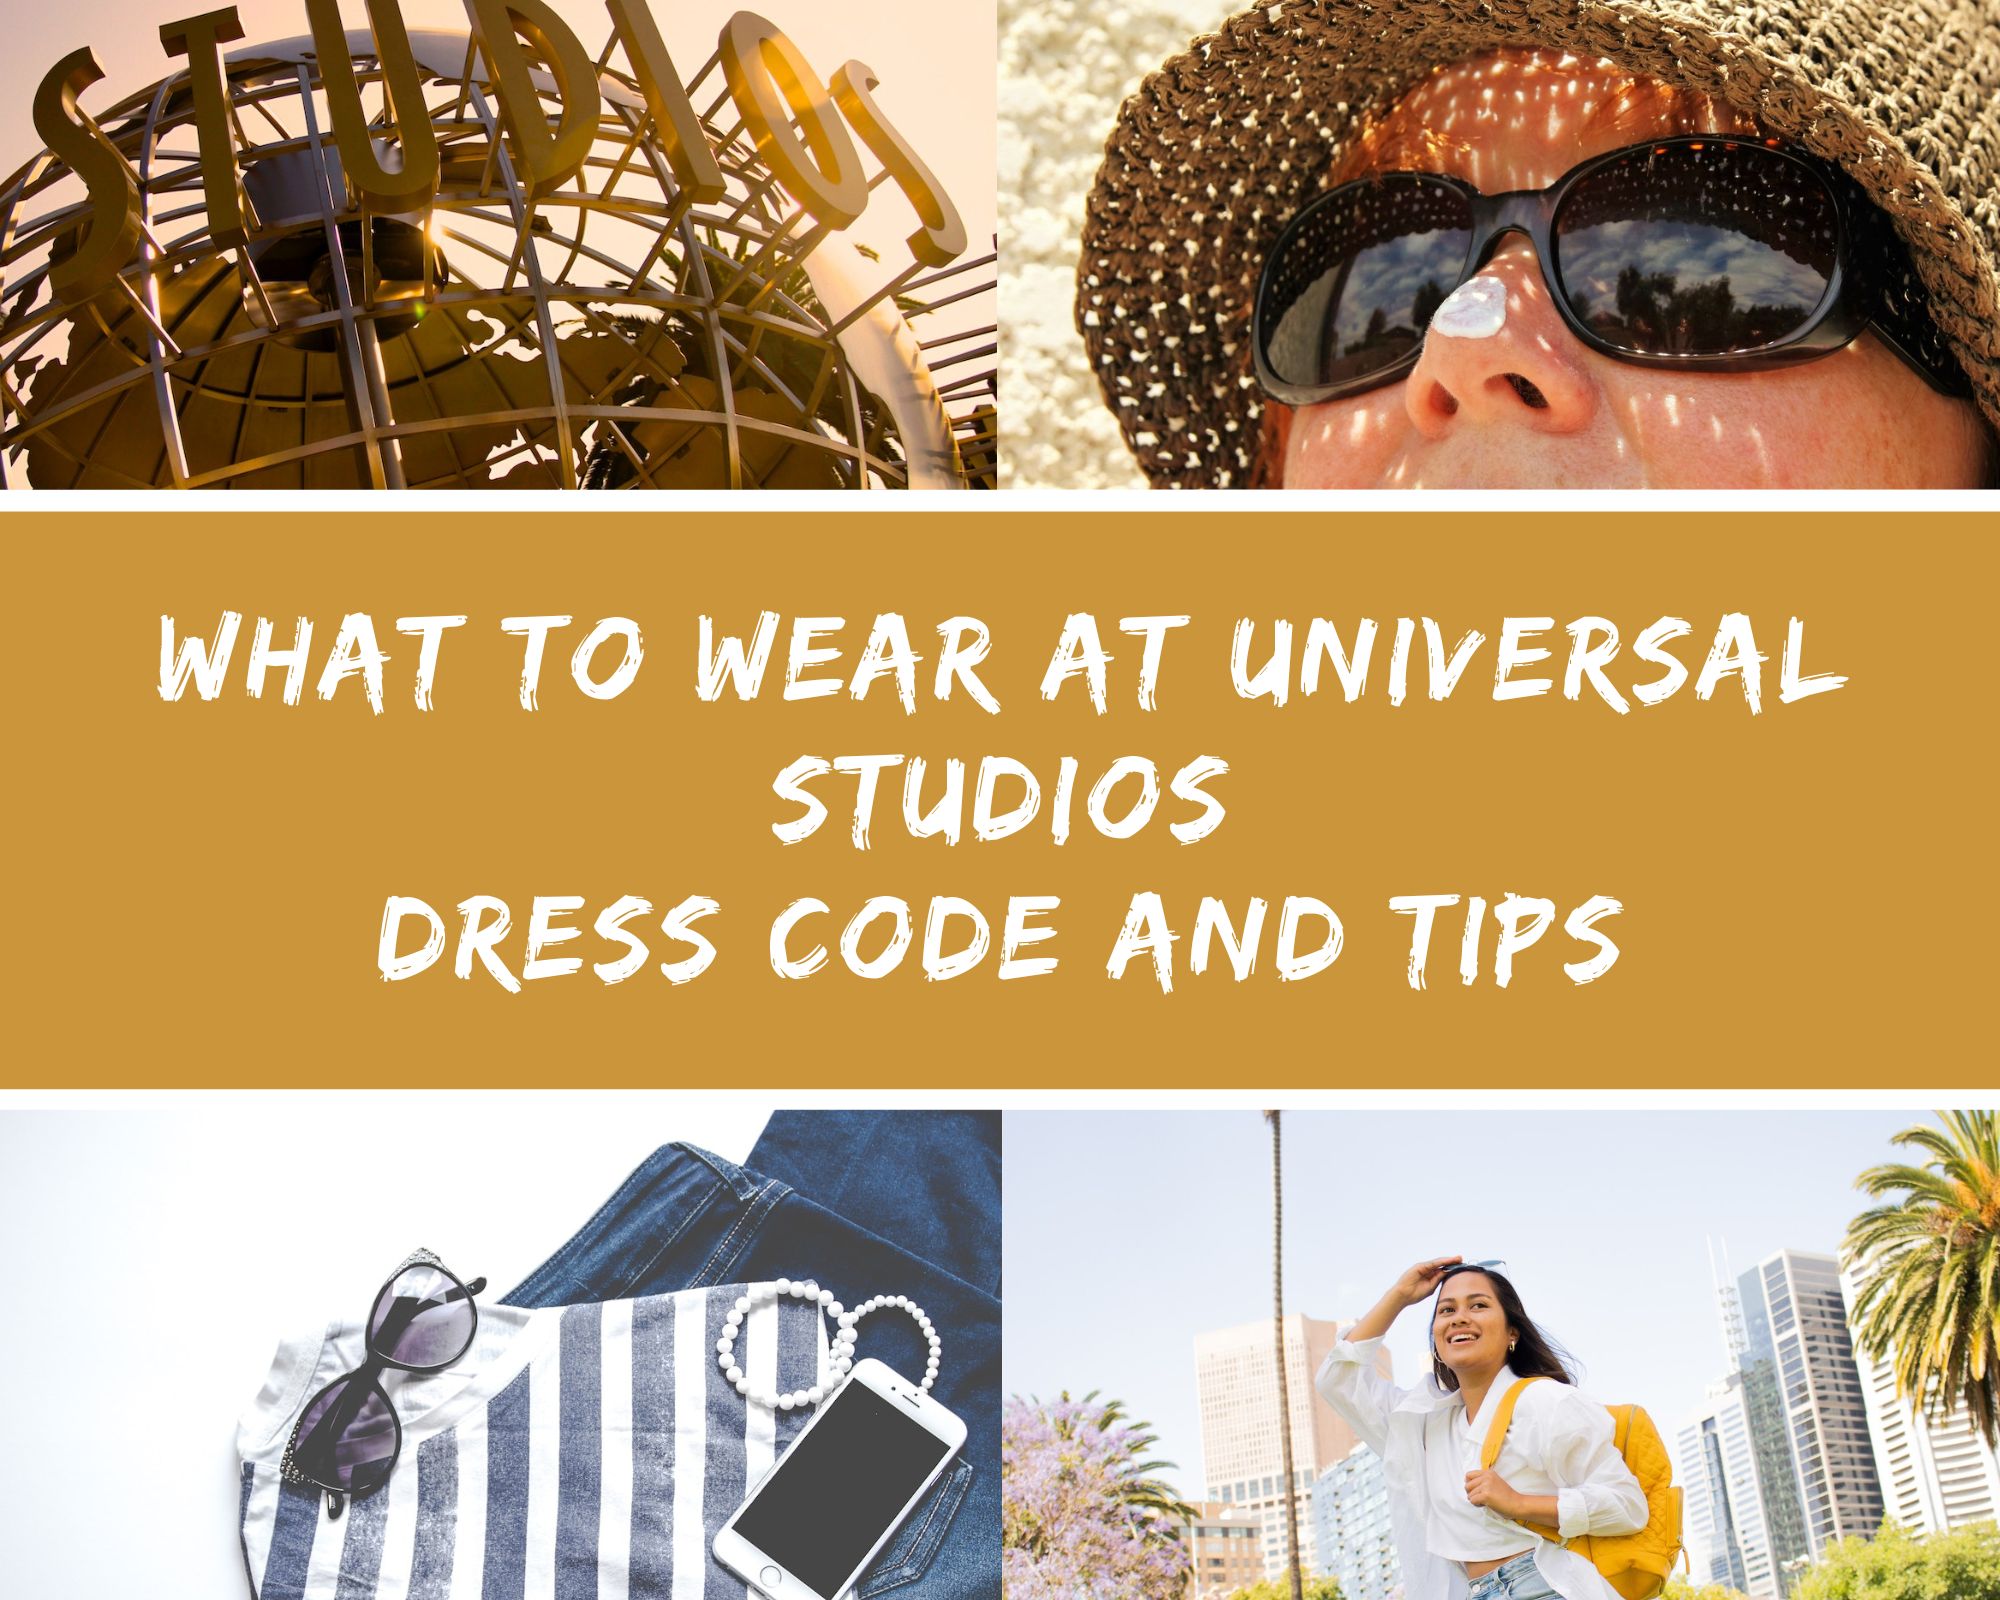 What to Wear at Universal Studios